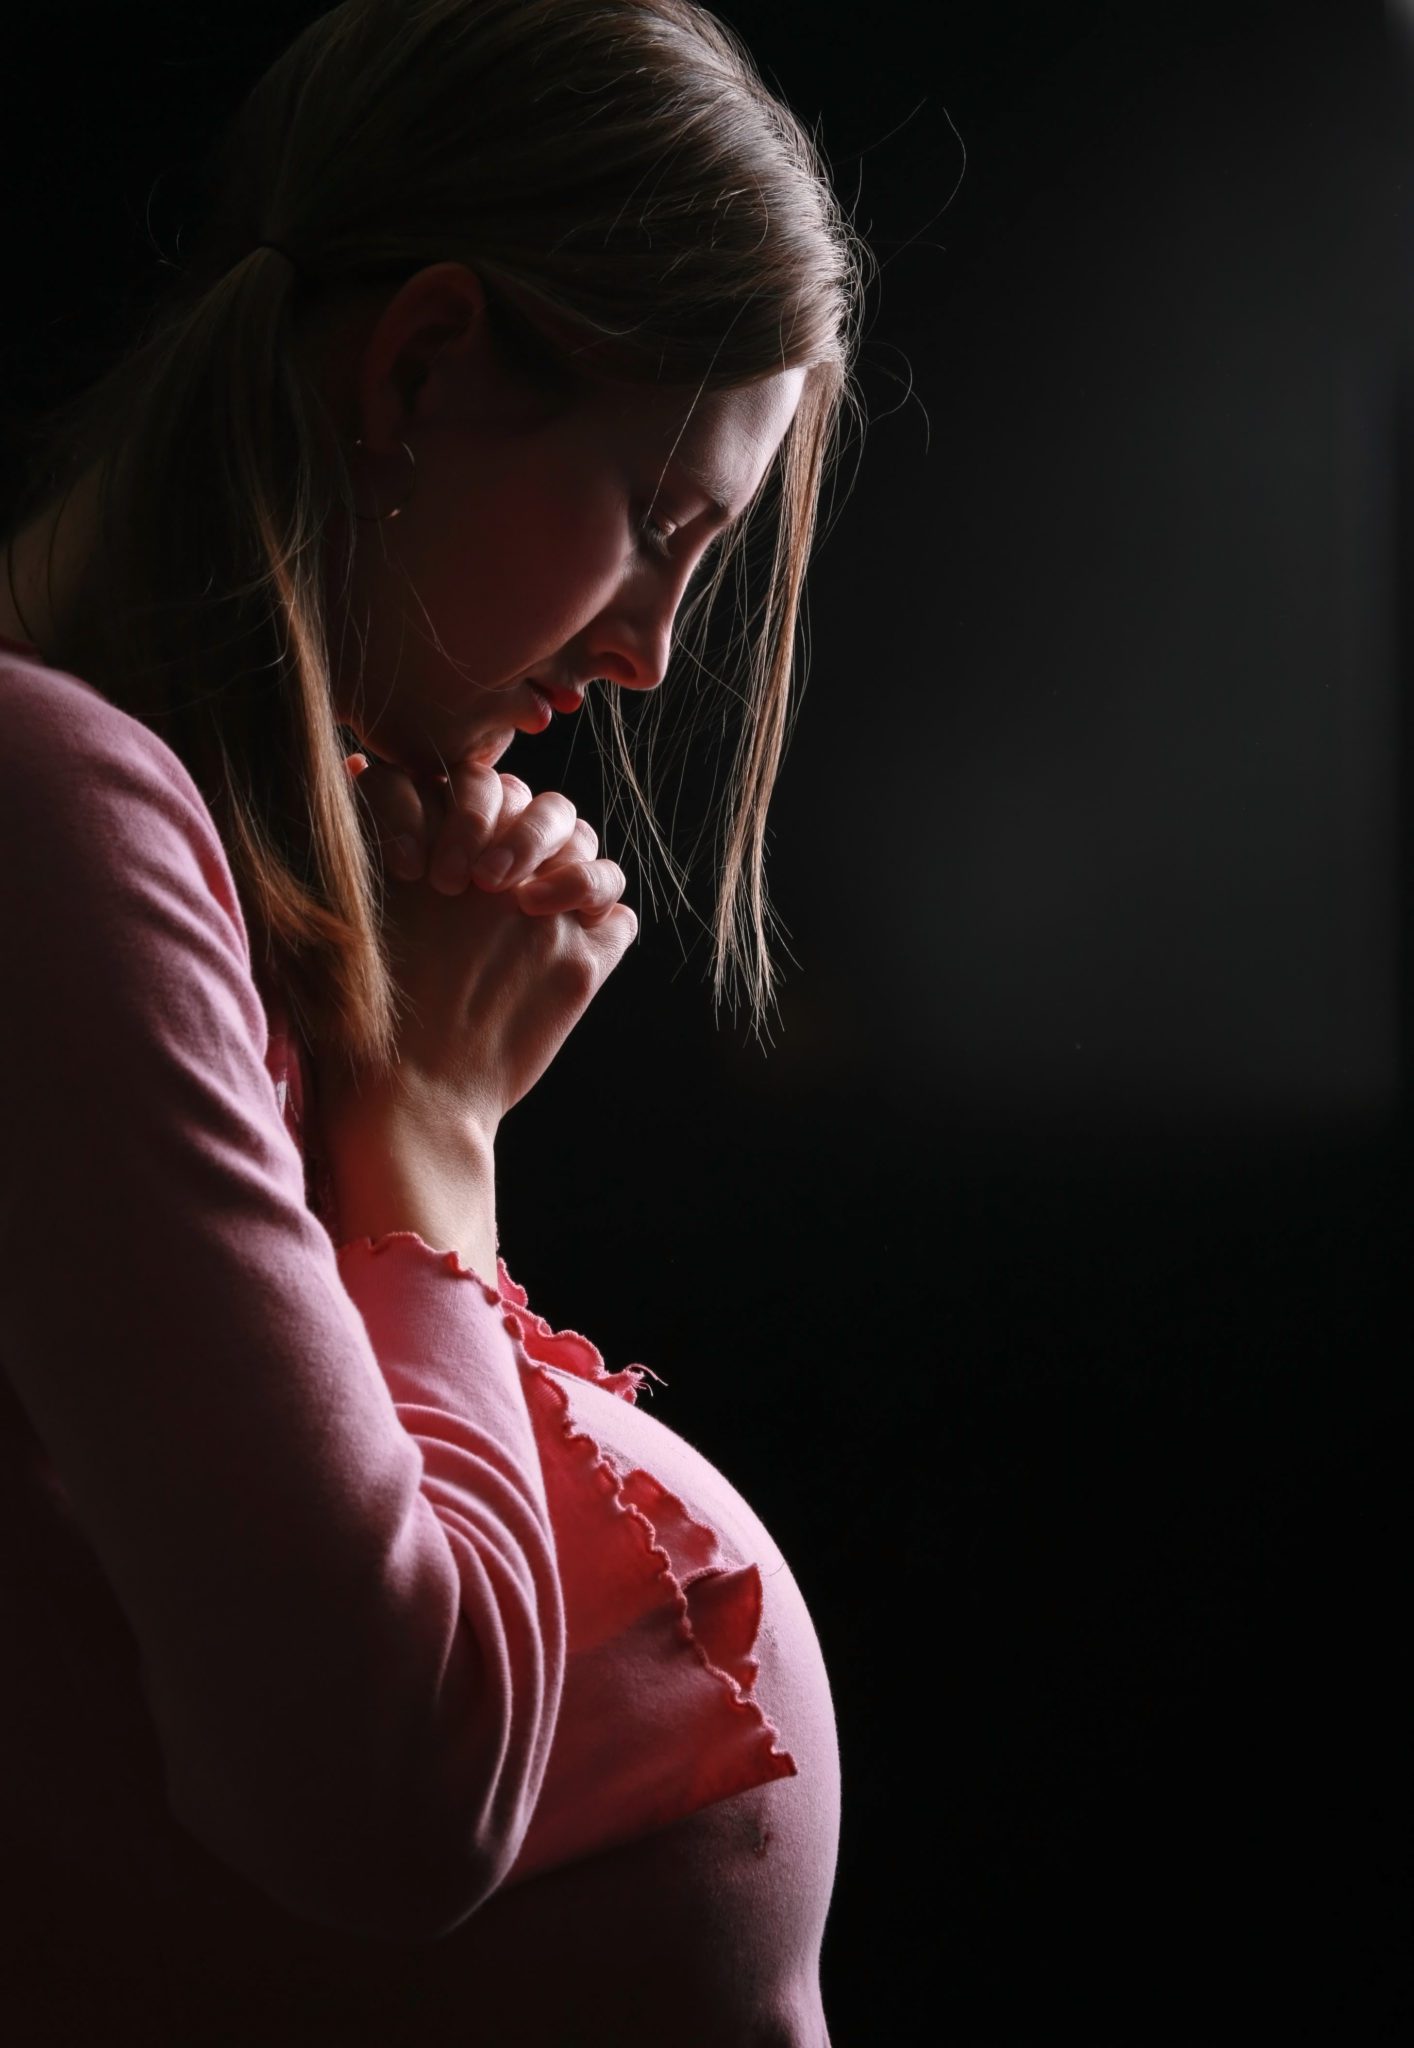 Pregnant woman in a dark room with her hands folded in prayer